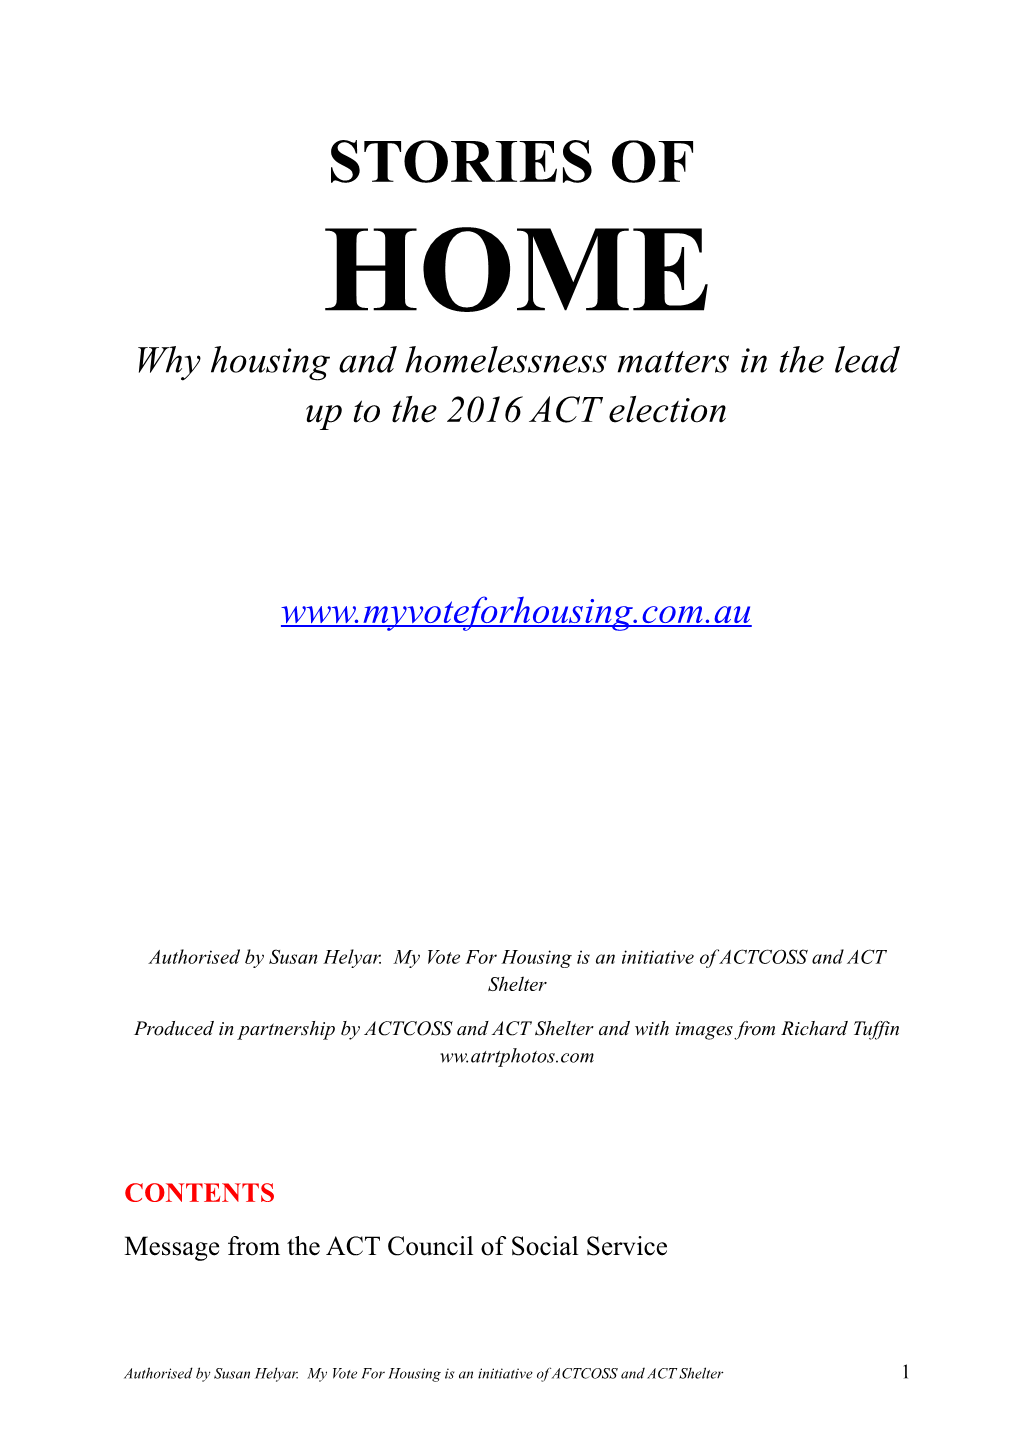 Why Housing and Homelessness Matters in the Lead up to the 2016 ACT Election